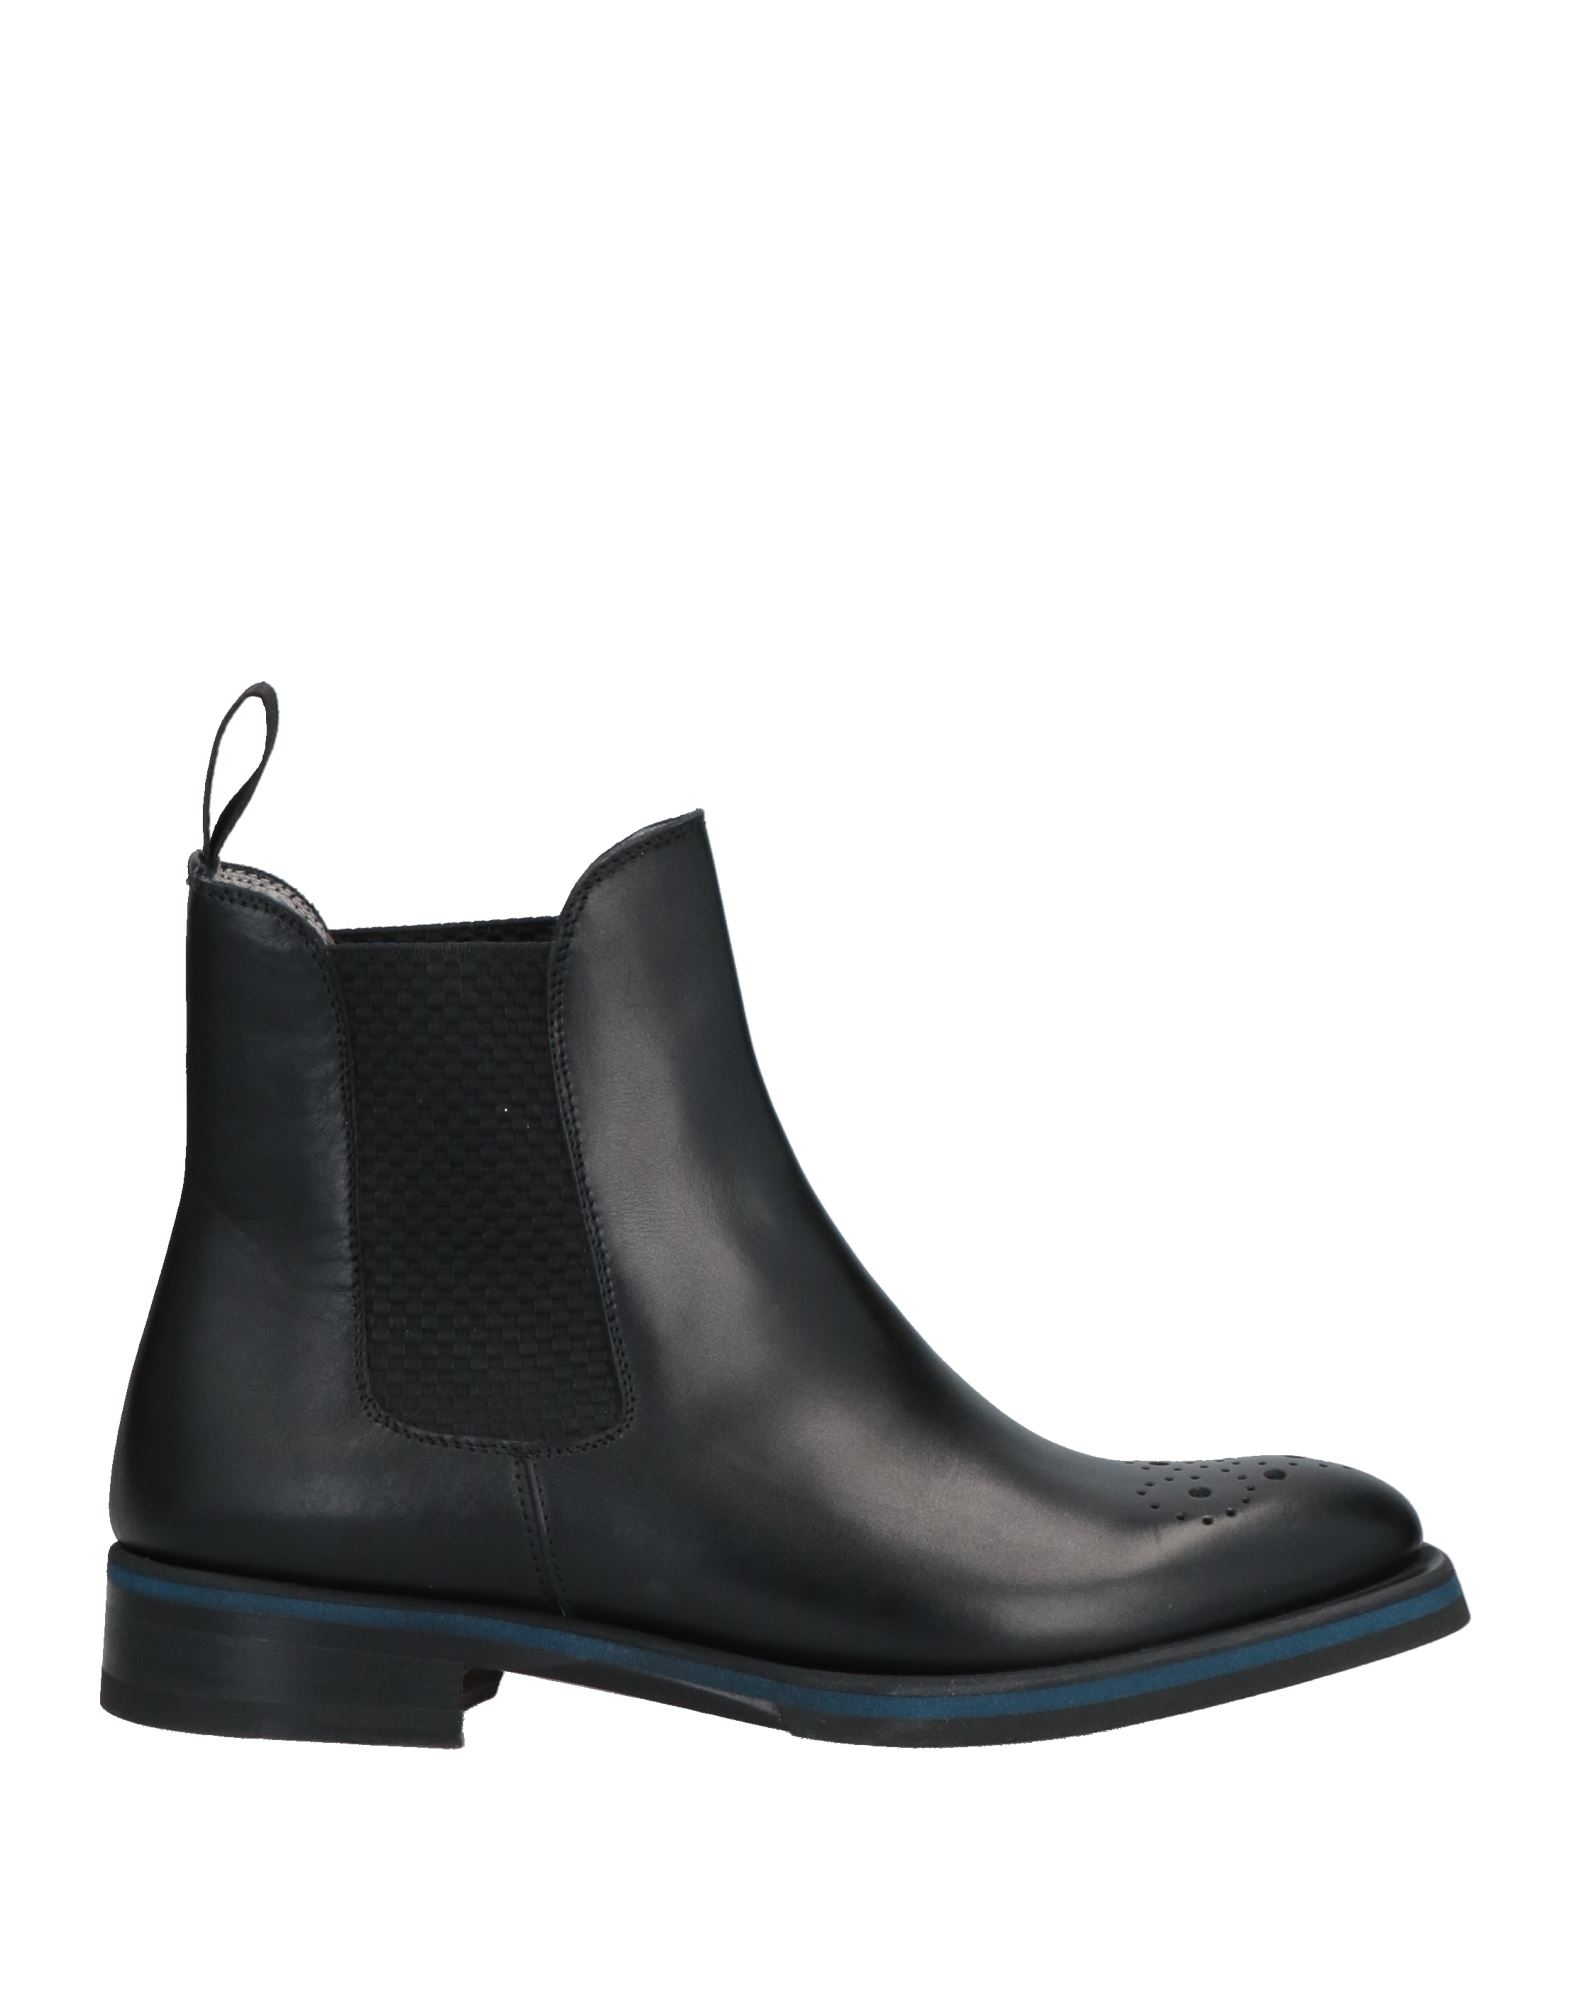 Pollini Ankle Boots In Black